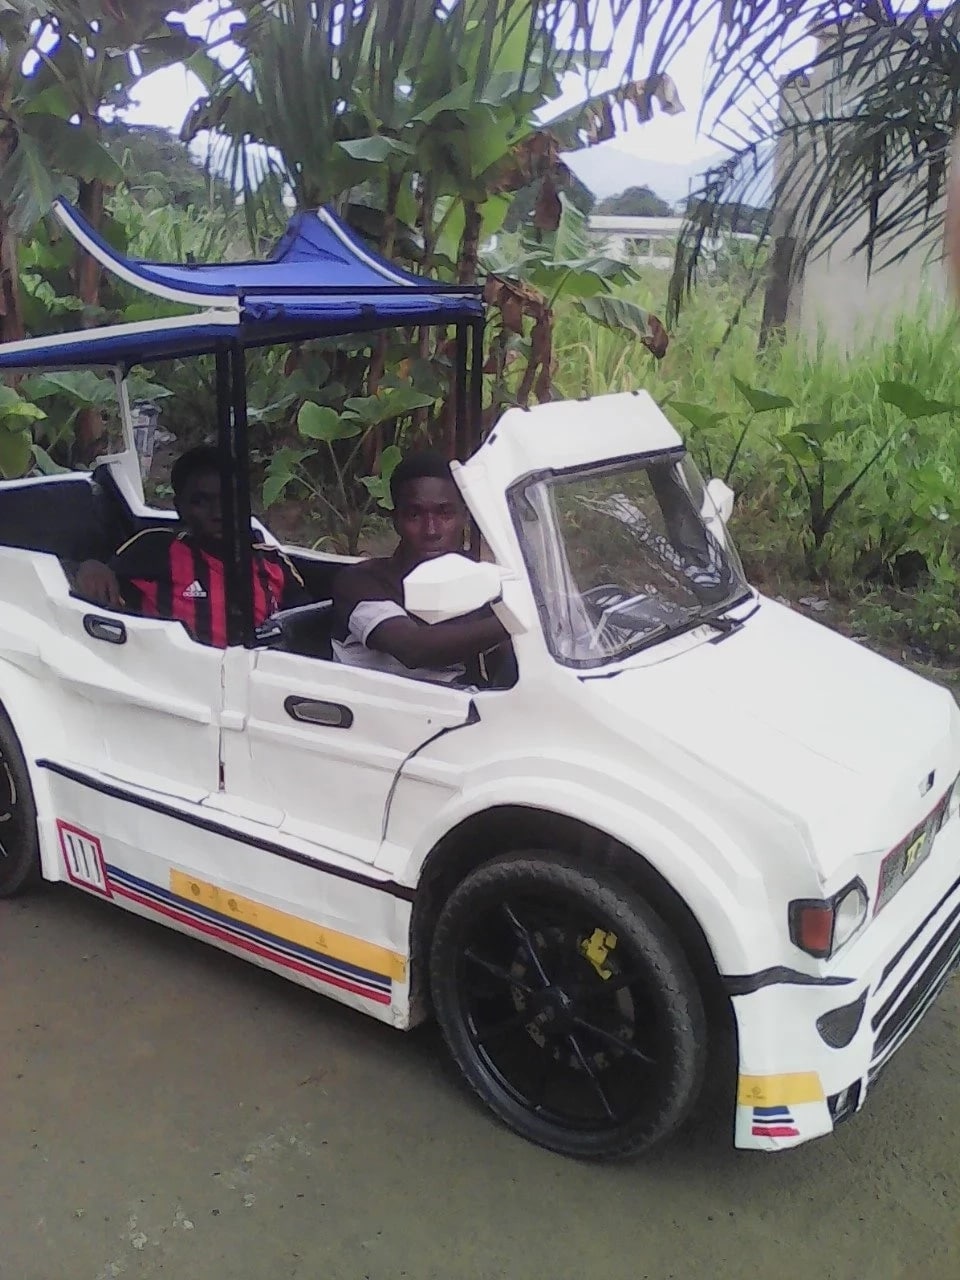 Young innovators: The two Ghanaian brothers who have successfully made a three-passenger car